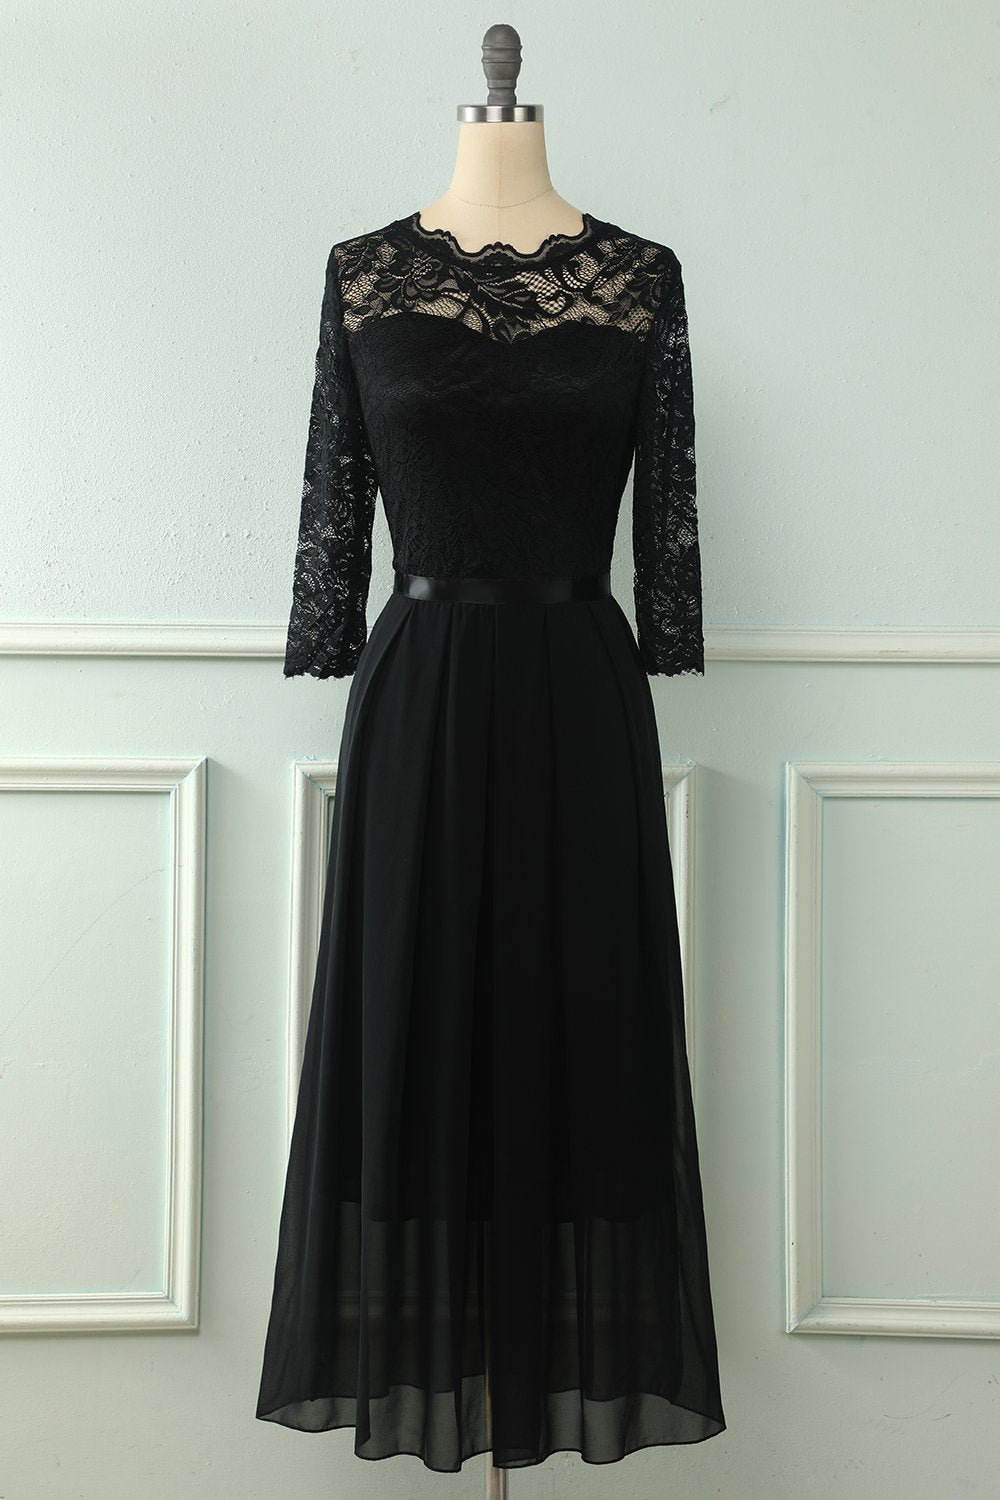 Black Lace Dress with Long Sleeves